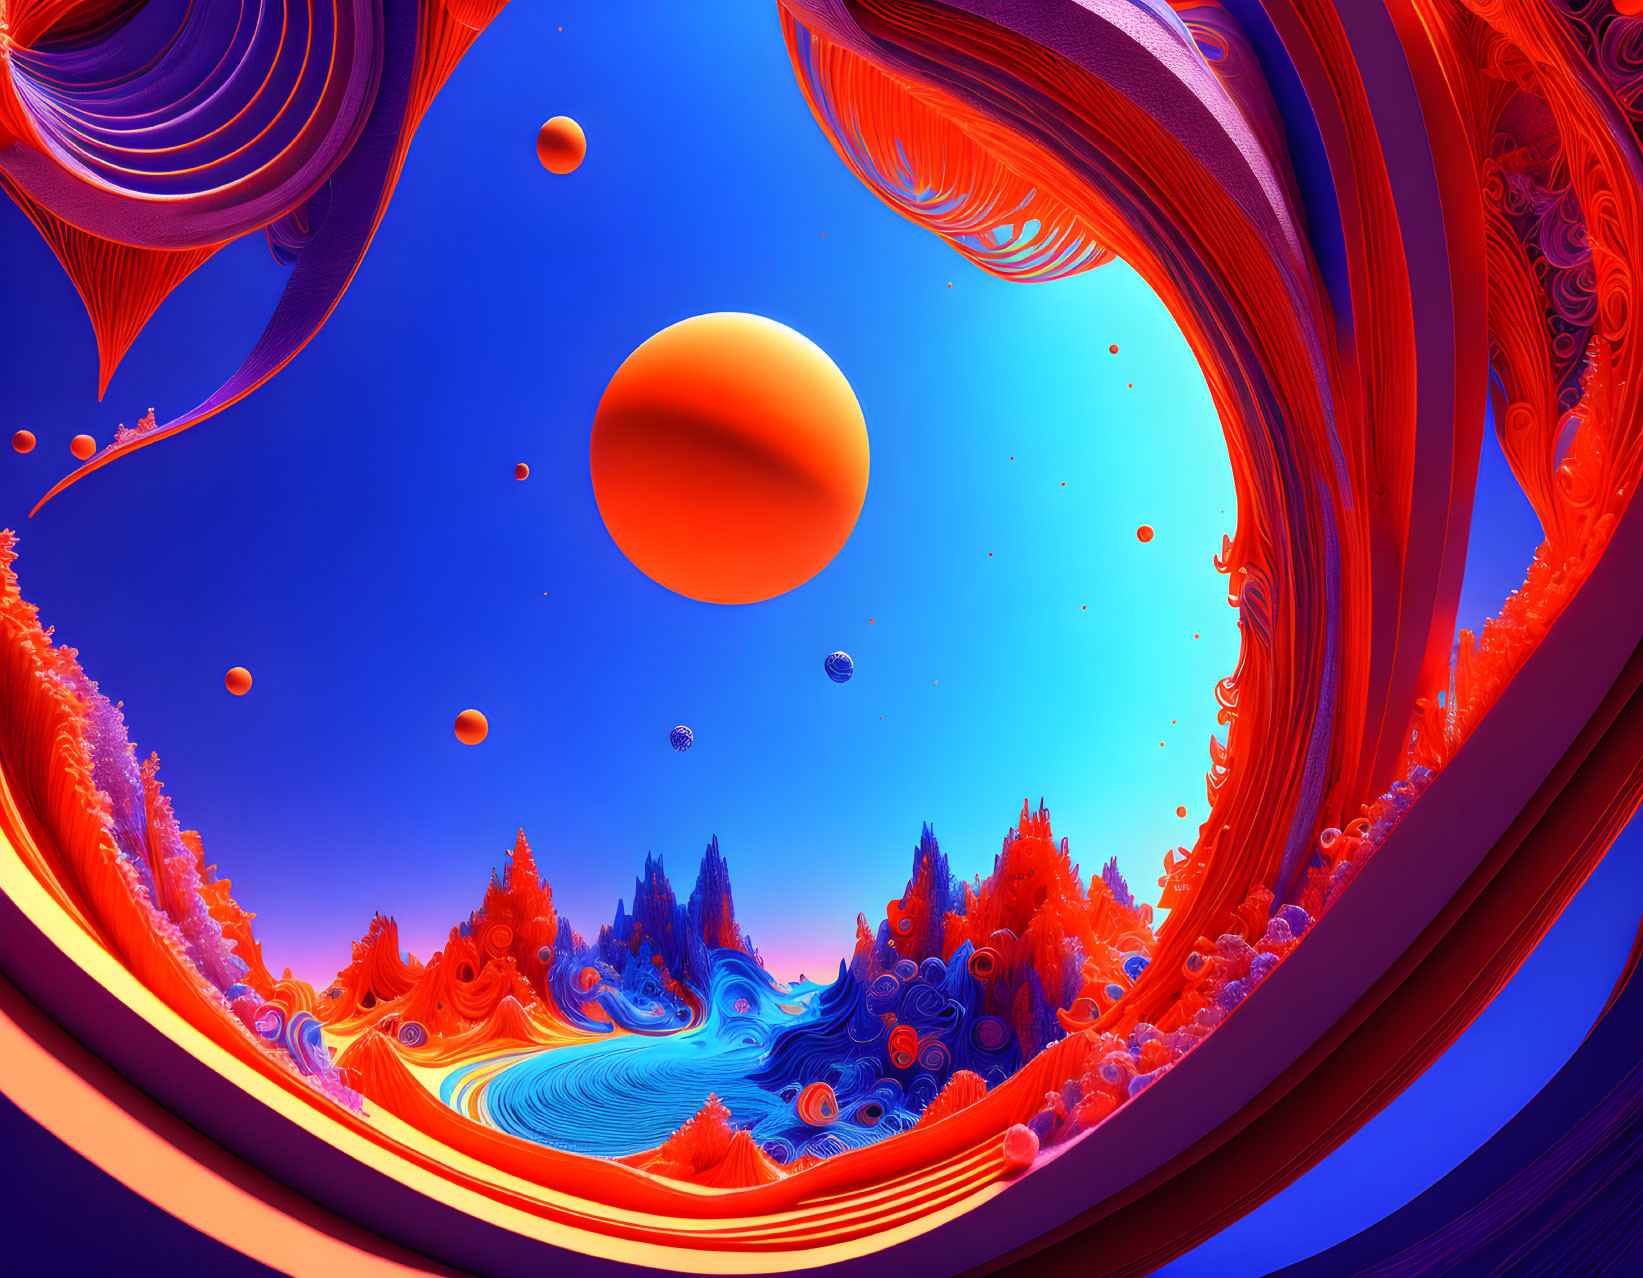 Colorful Digital Art: Swirling Red and Blue Patterns with Floating Spheres